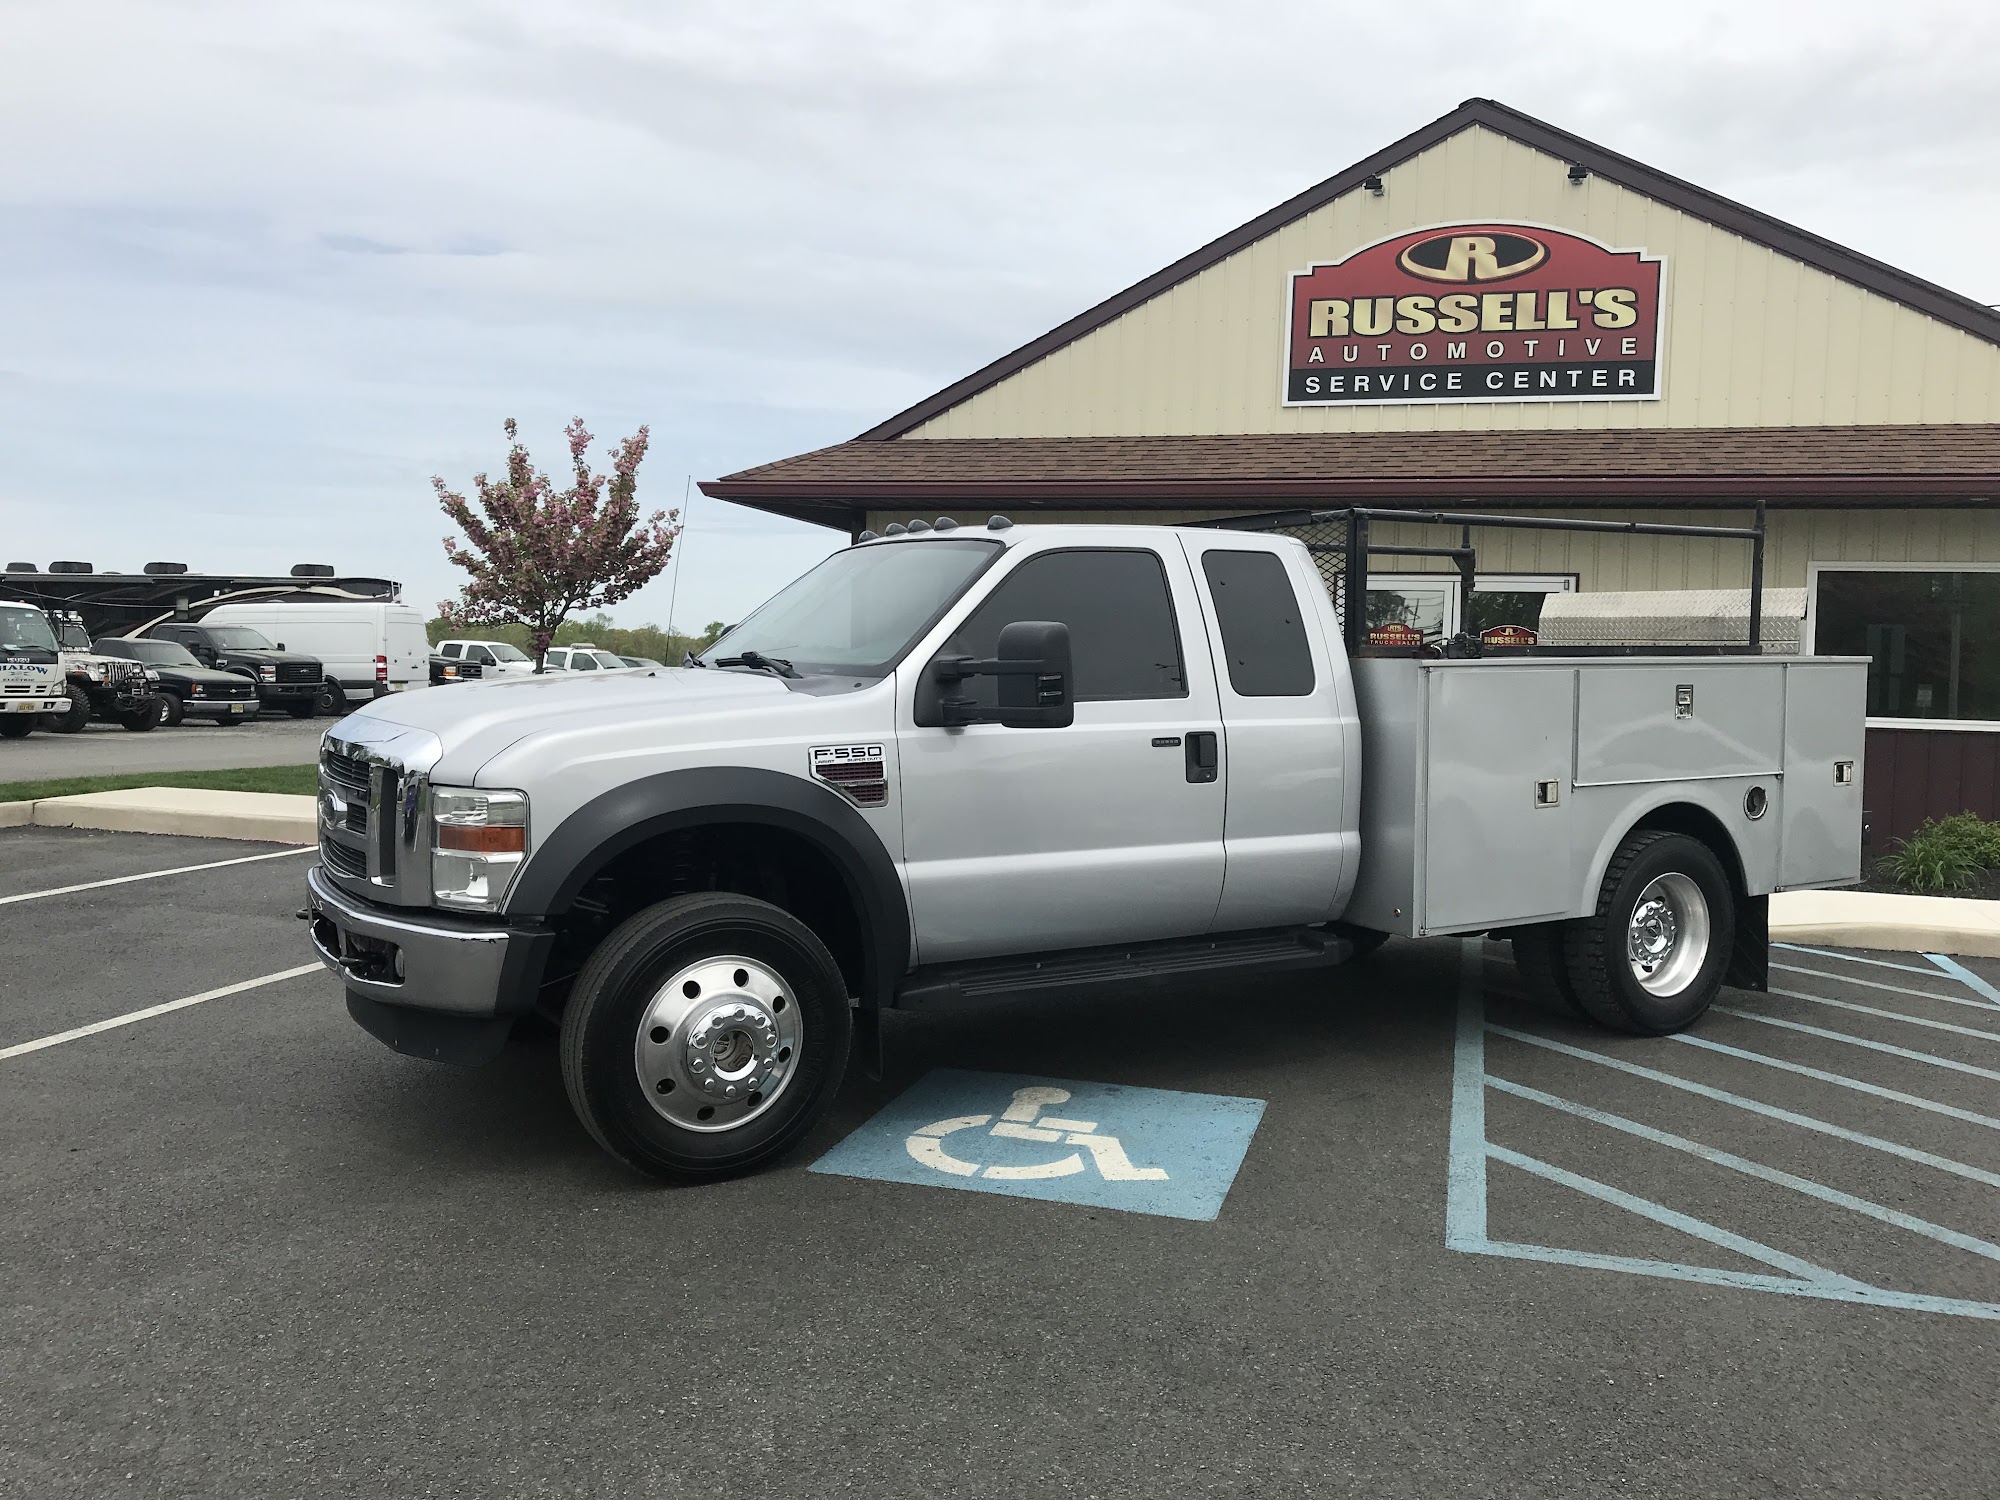 Russell's Truck Sales